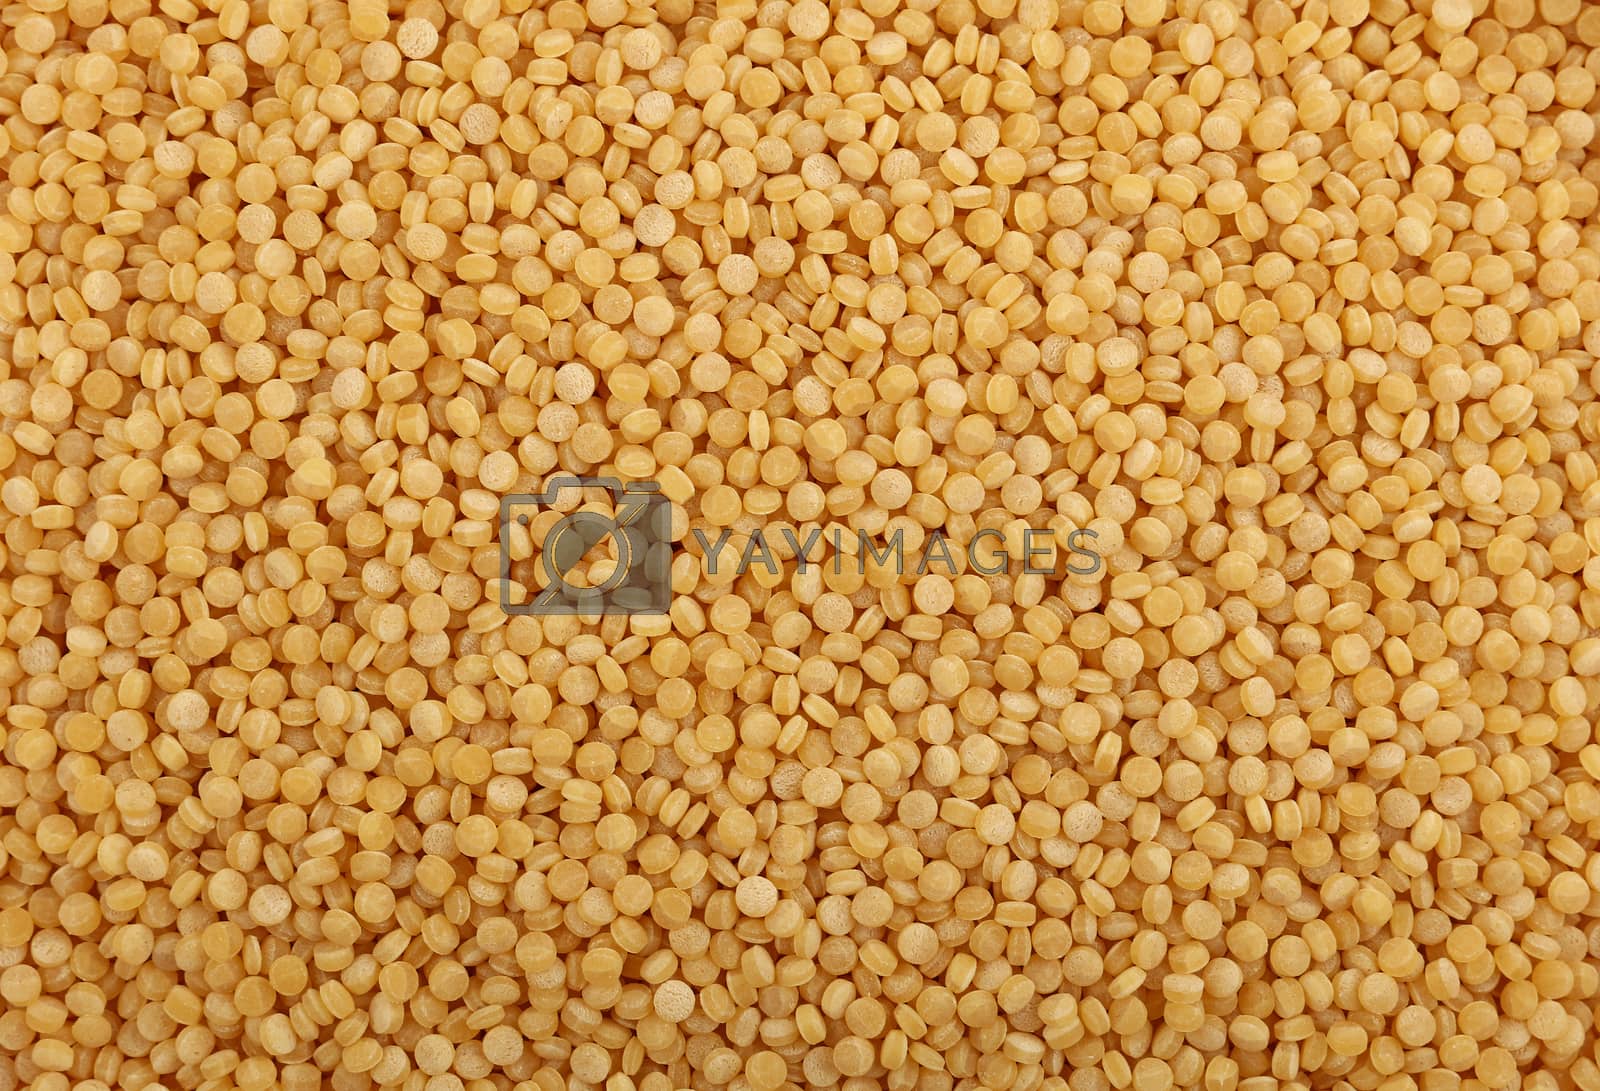 Royalty free image of Ptitim pasta Israeli couscous close up background by BreakingTheWalls